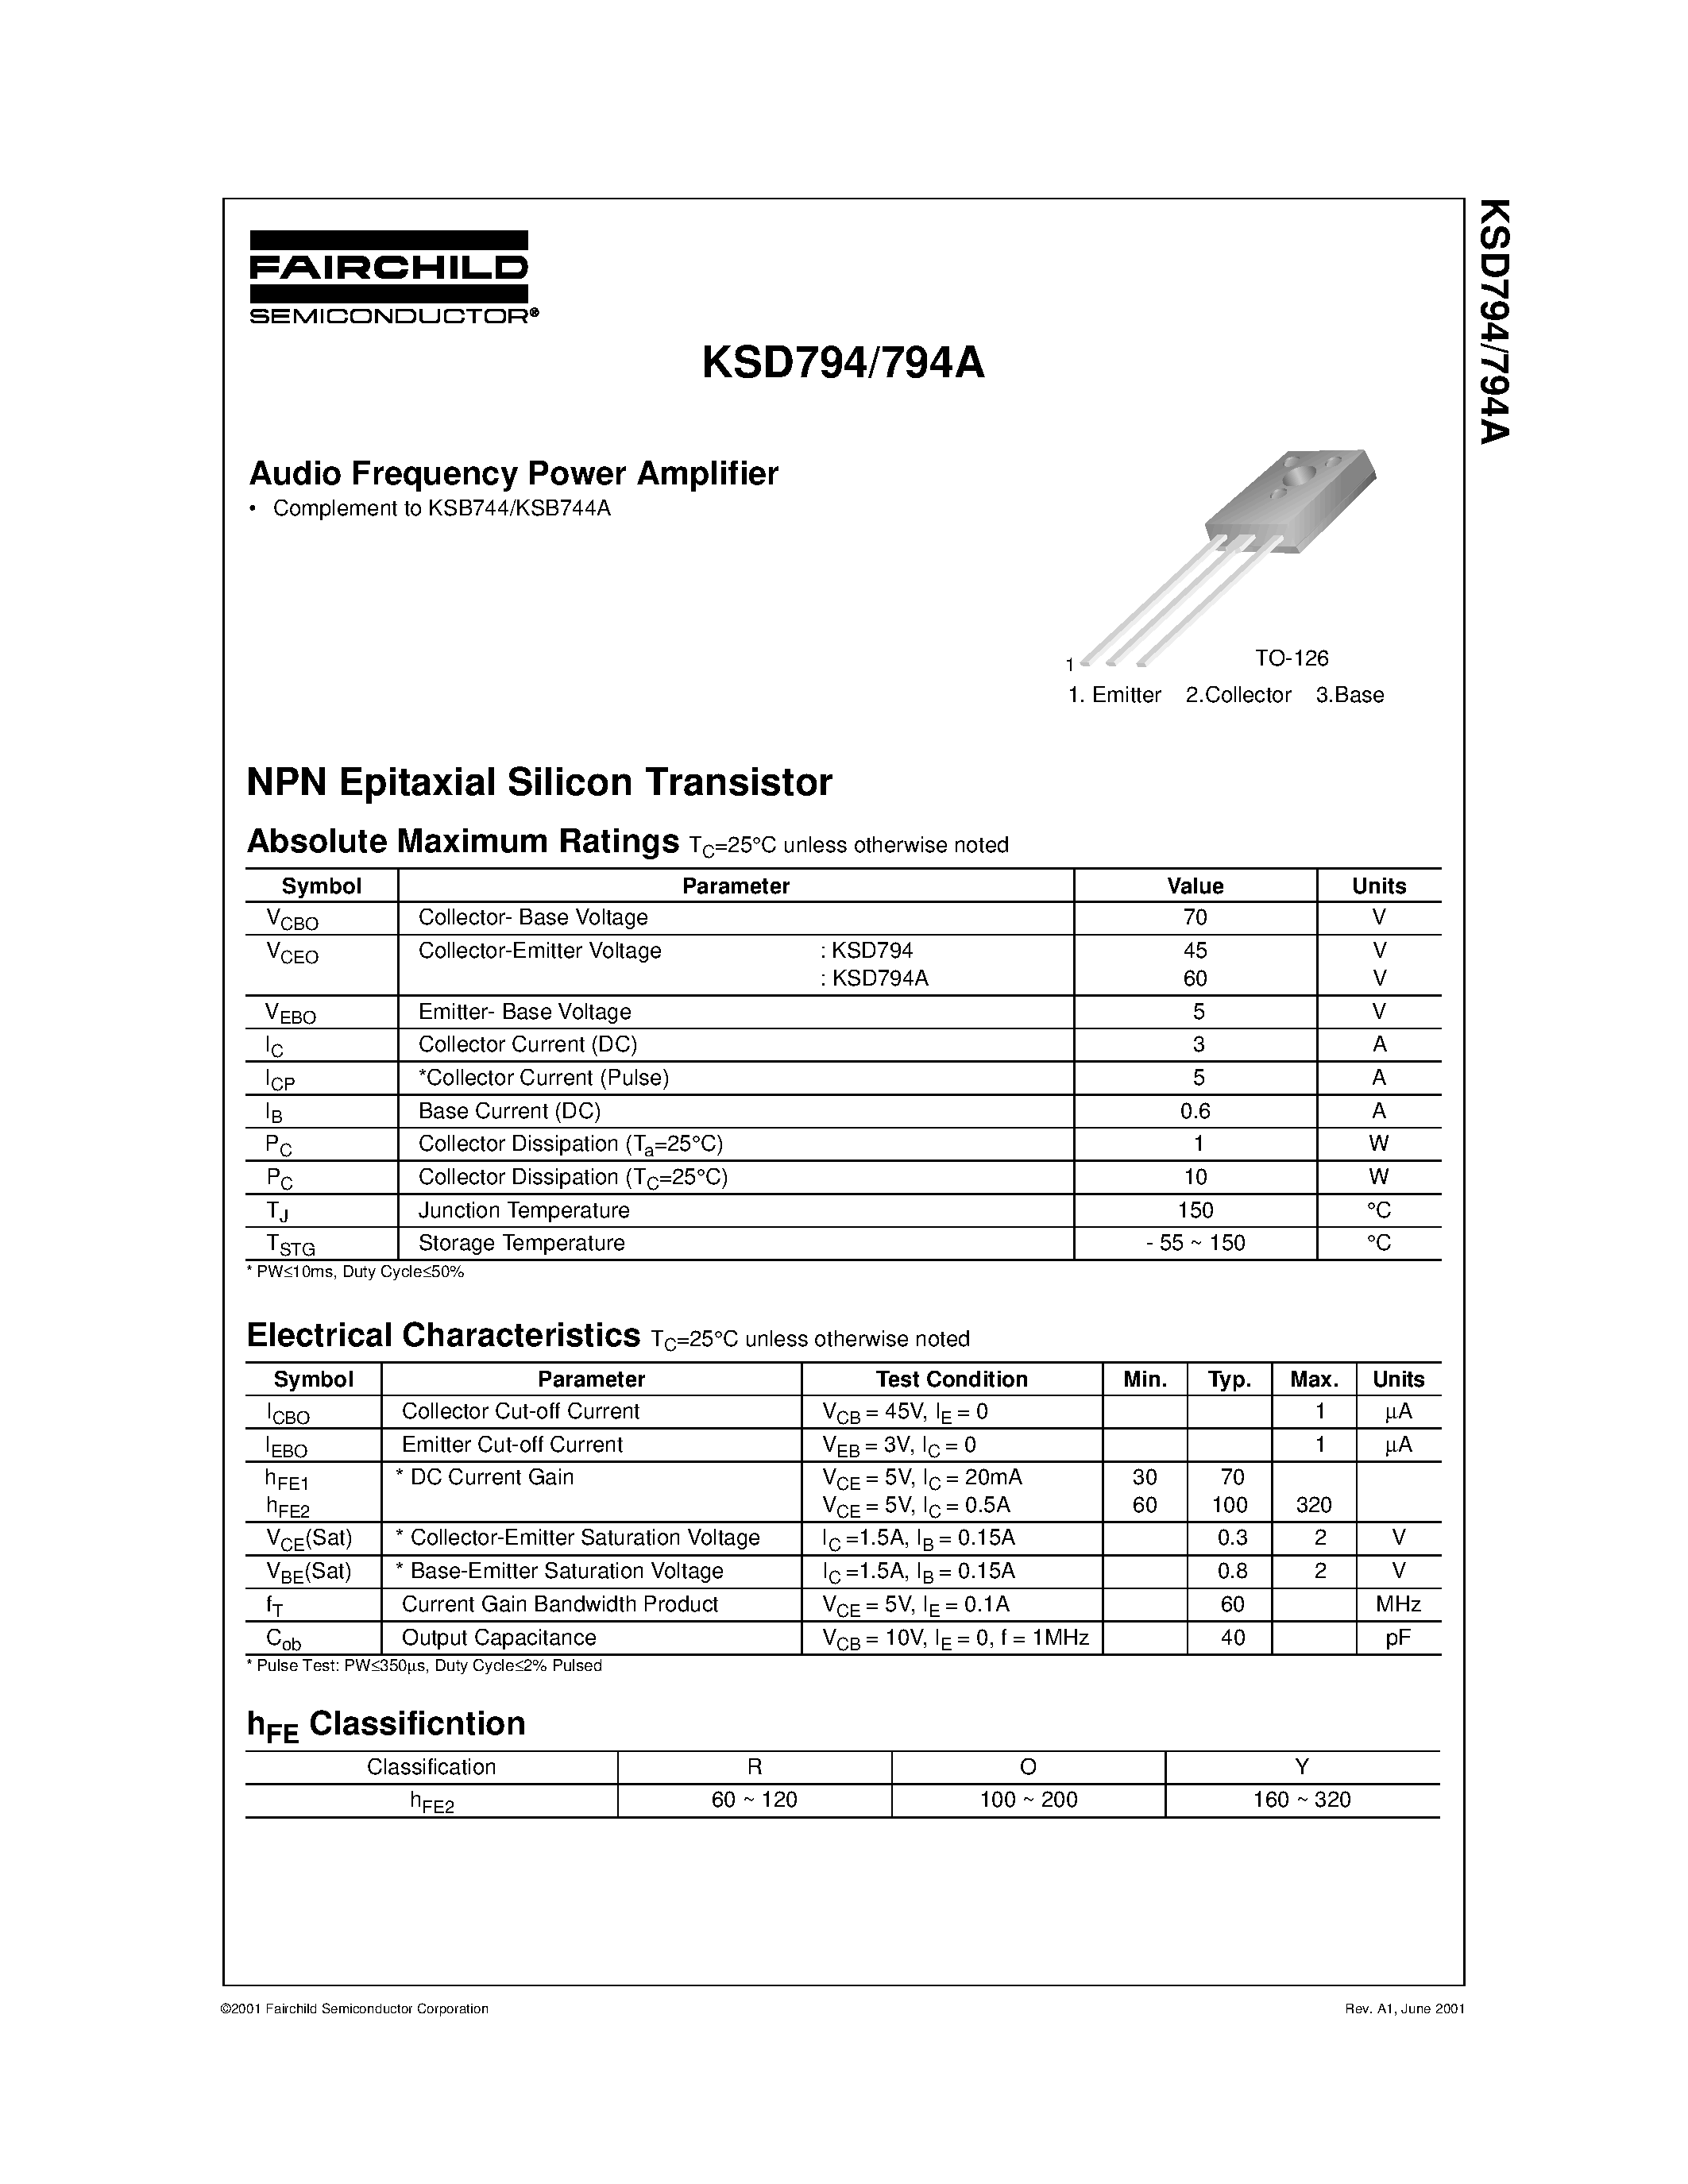 Datasheet KSD794A - Audio Frequency Power Amplifier page 1